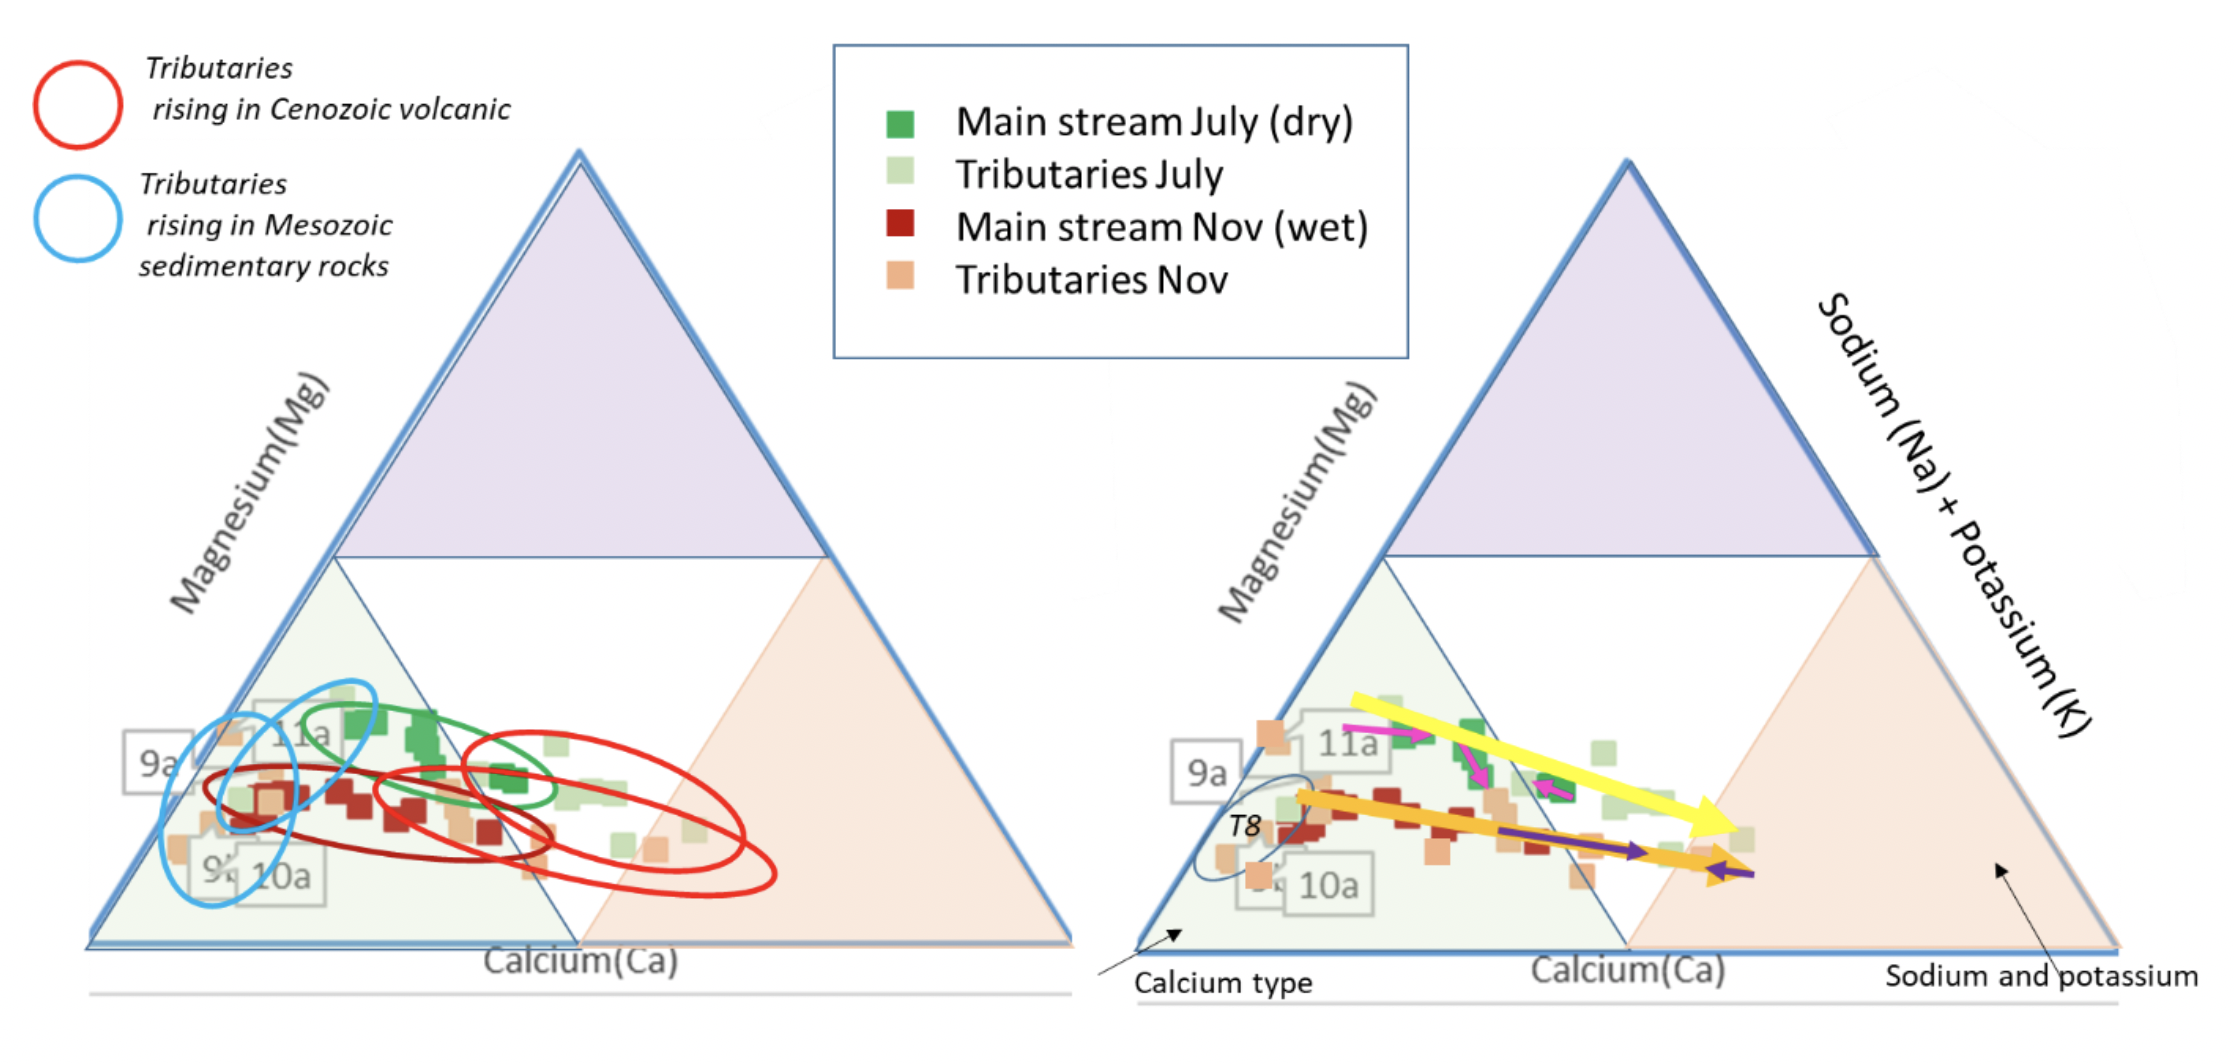 Cation triangular plots for Cañete River and tributaries. LH: showing the different chemical types for the tributaries arising over different geology; RH showing the trend downstream from calcium type to sodium type waters.